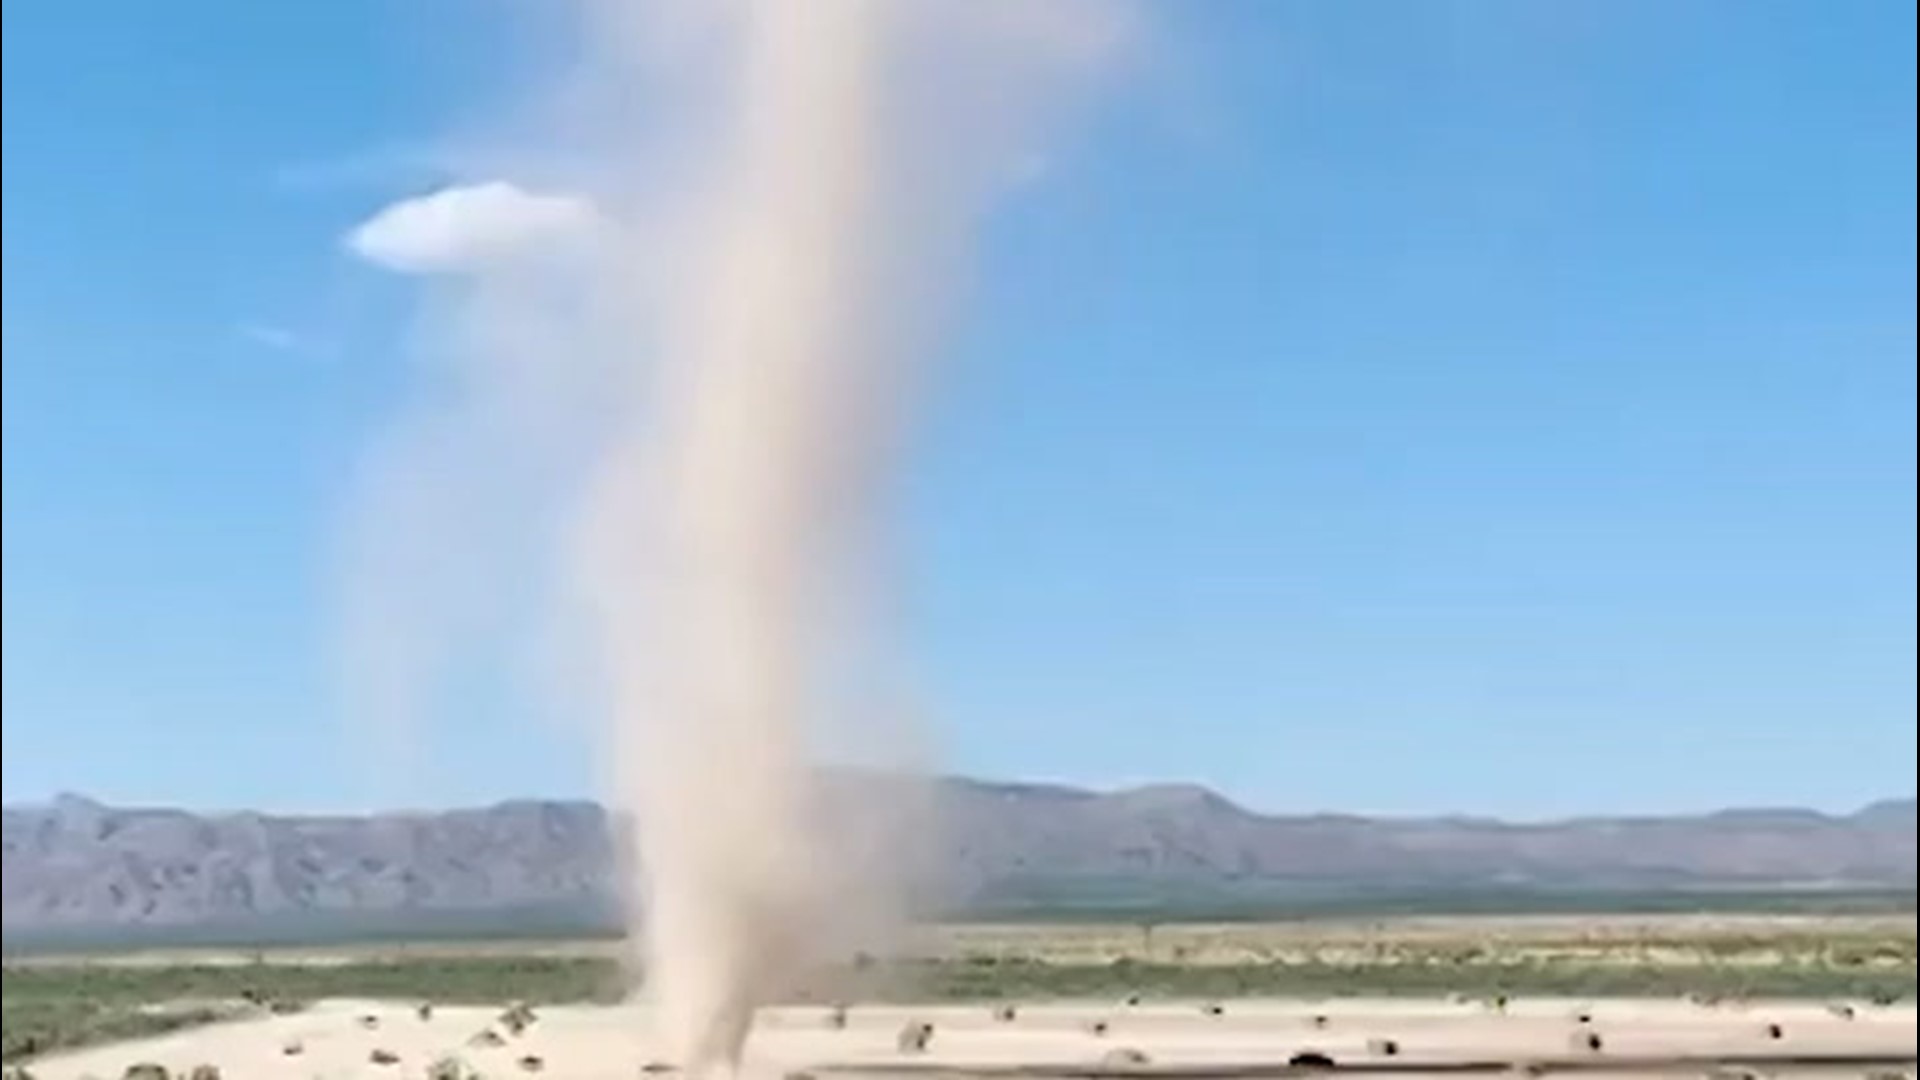 Incredible video captured in Marfa, Texas, shows a dust devil spinning through the area on June 25.